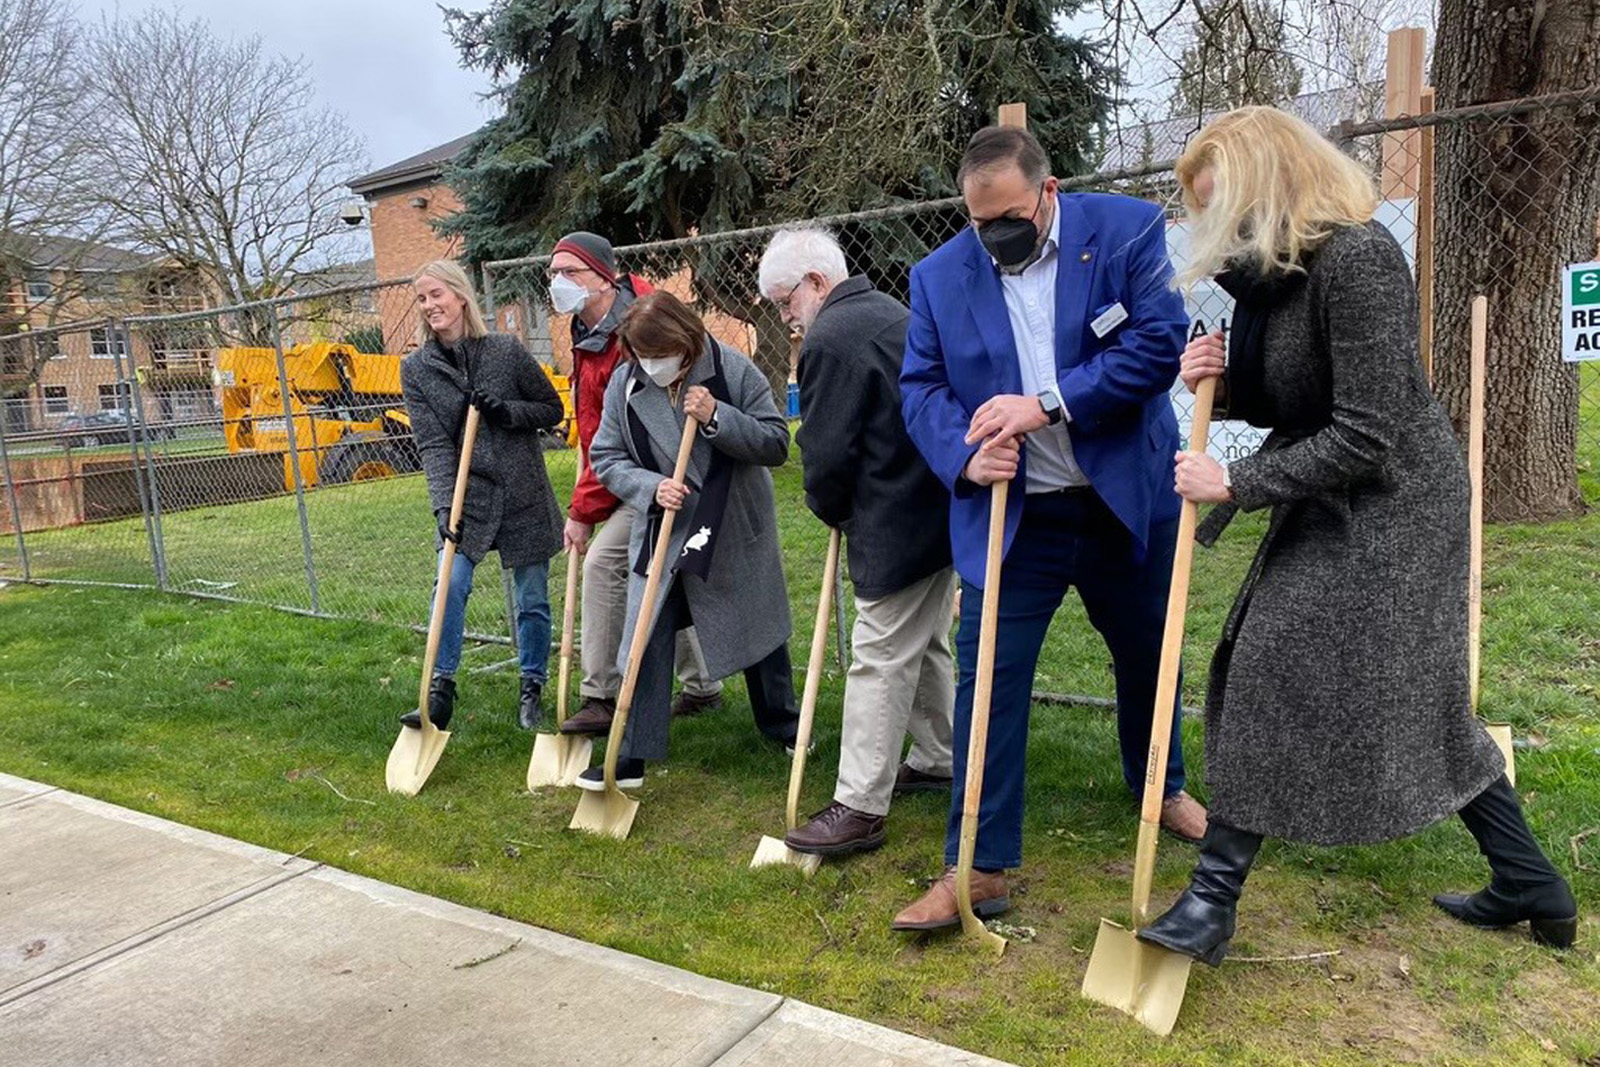 Dignitaries mark the launch of Yaquina Hall housing construction with a ground-breaking ceremony February 2.